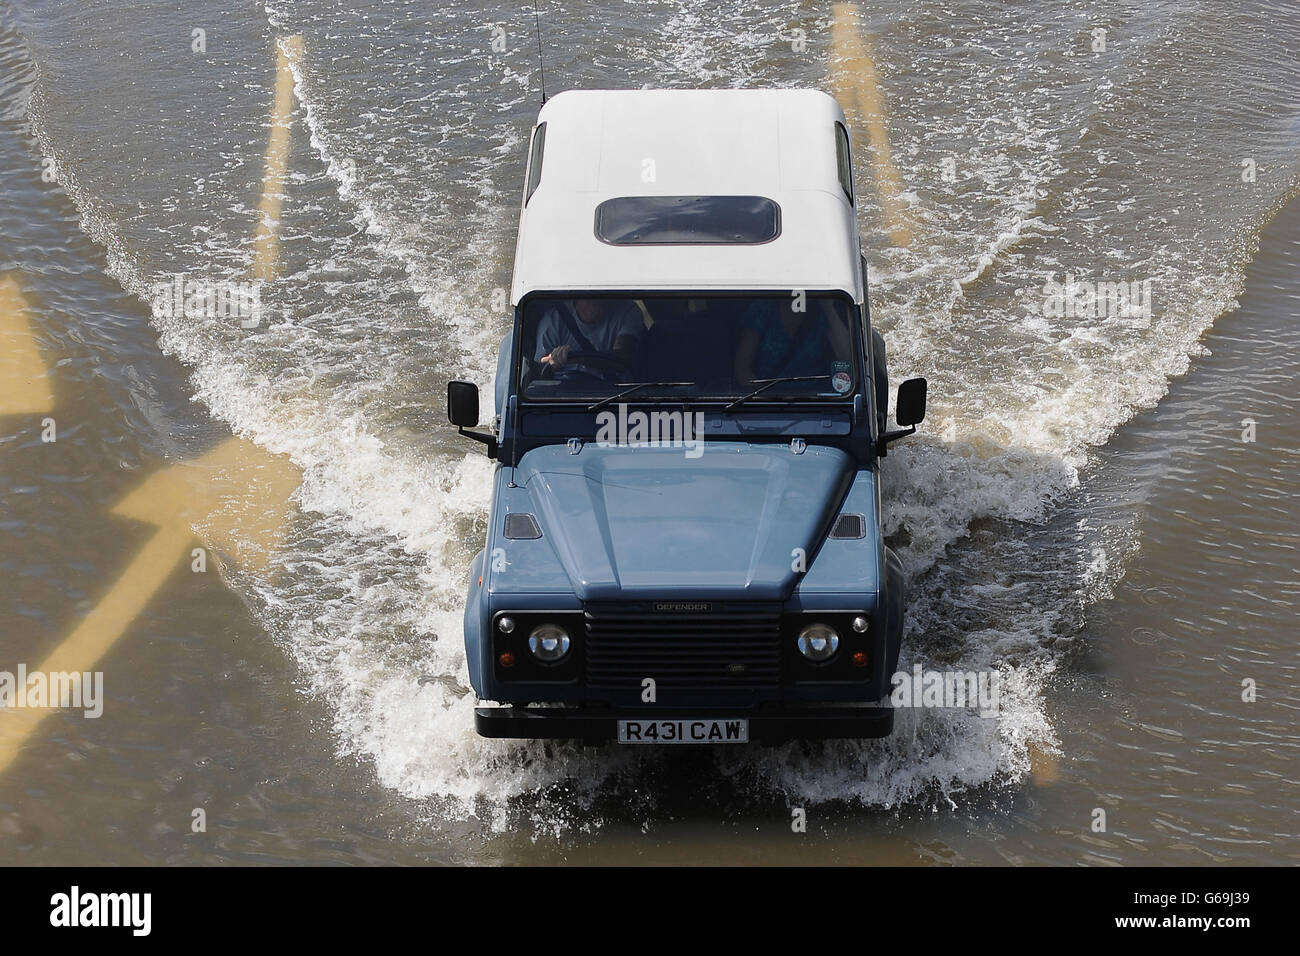 A motorist makes his way through flood water on Mountsorrel Lane in Loughborough. Torrential rain, thunder and lightning is blighting the first weekend of the school holidays, as thousands set off across the UK for their summer break. Stock Photo